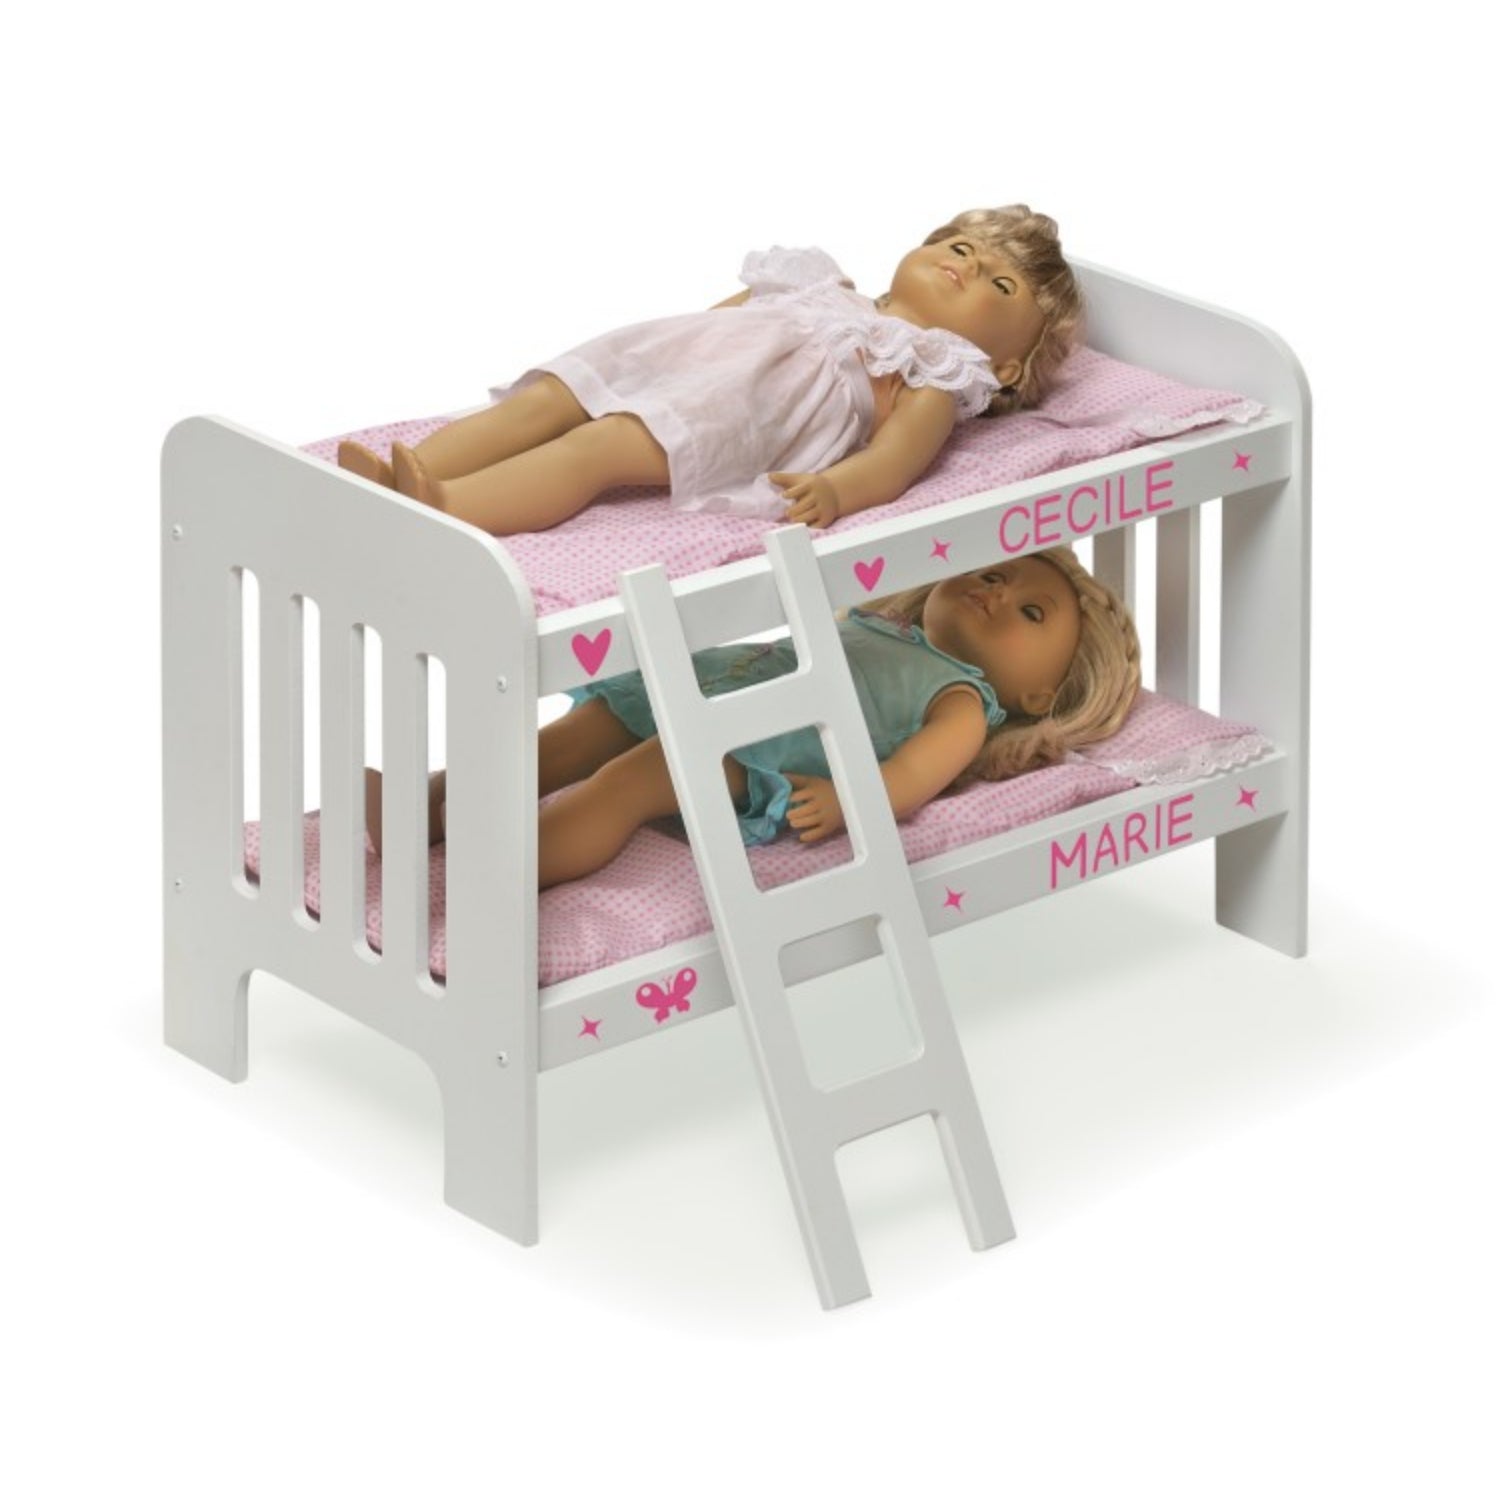 Badger Basket Doll Bunk Bed with Bedding, Ladder, and Free Personalization Kit – White/Pink/Gingham